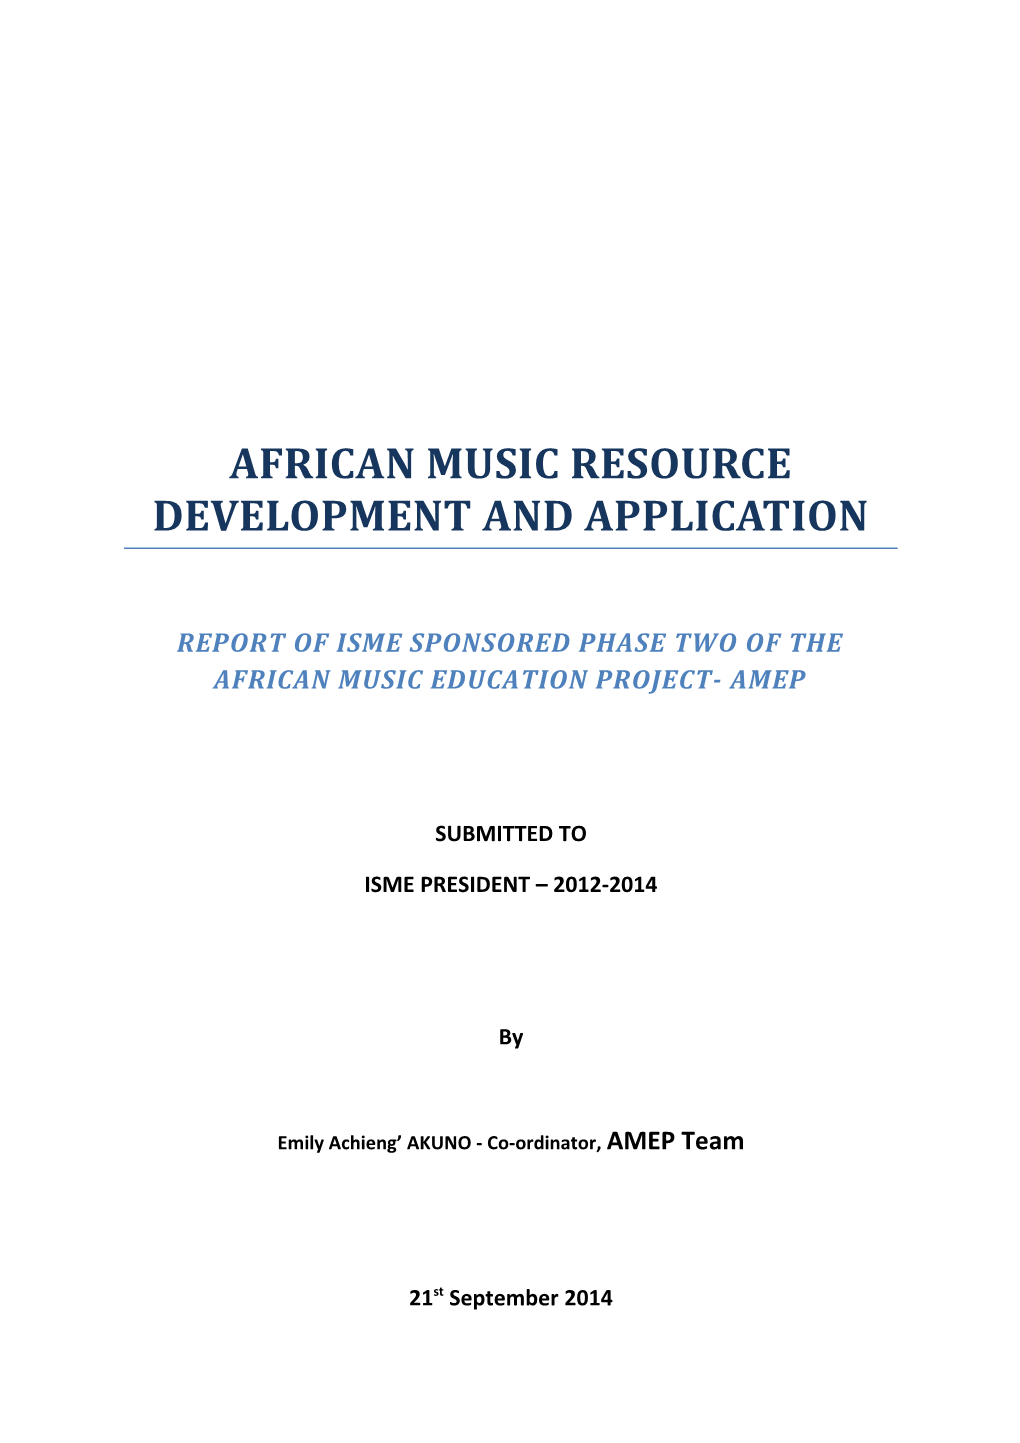 Report of Isme Sponsored Phase Two of the African Music Education Project- Amep